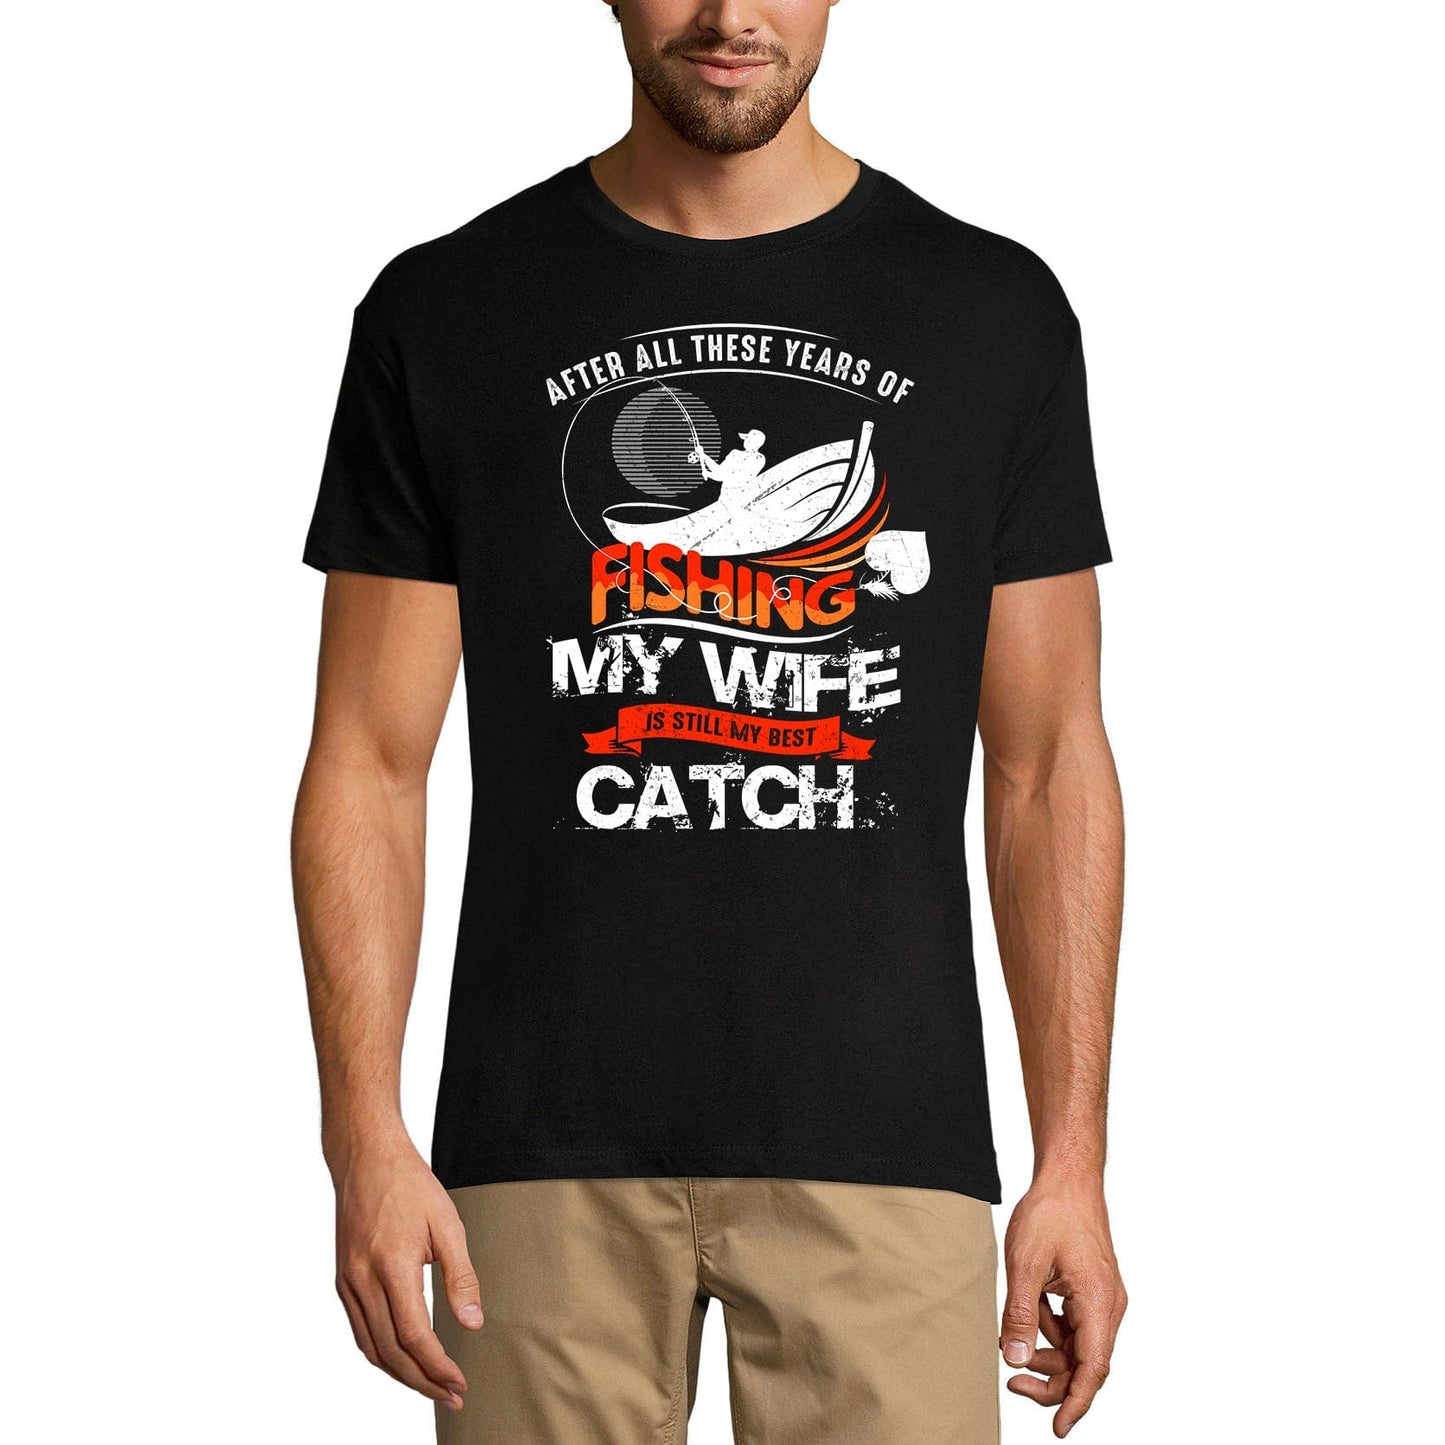 ULTRABASIC Men's T-Shirt After All These Years of Fishing My Wife is Still My Best Catch - Funny Humor Fisherman Tee Shirt